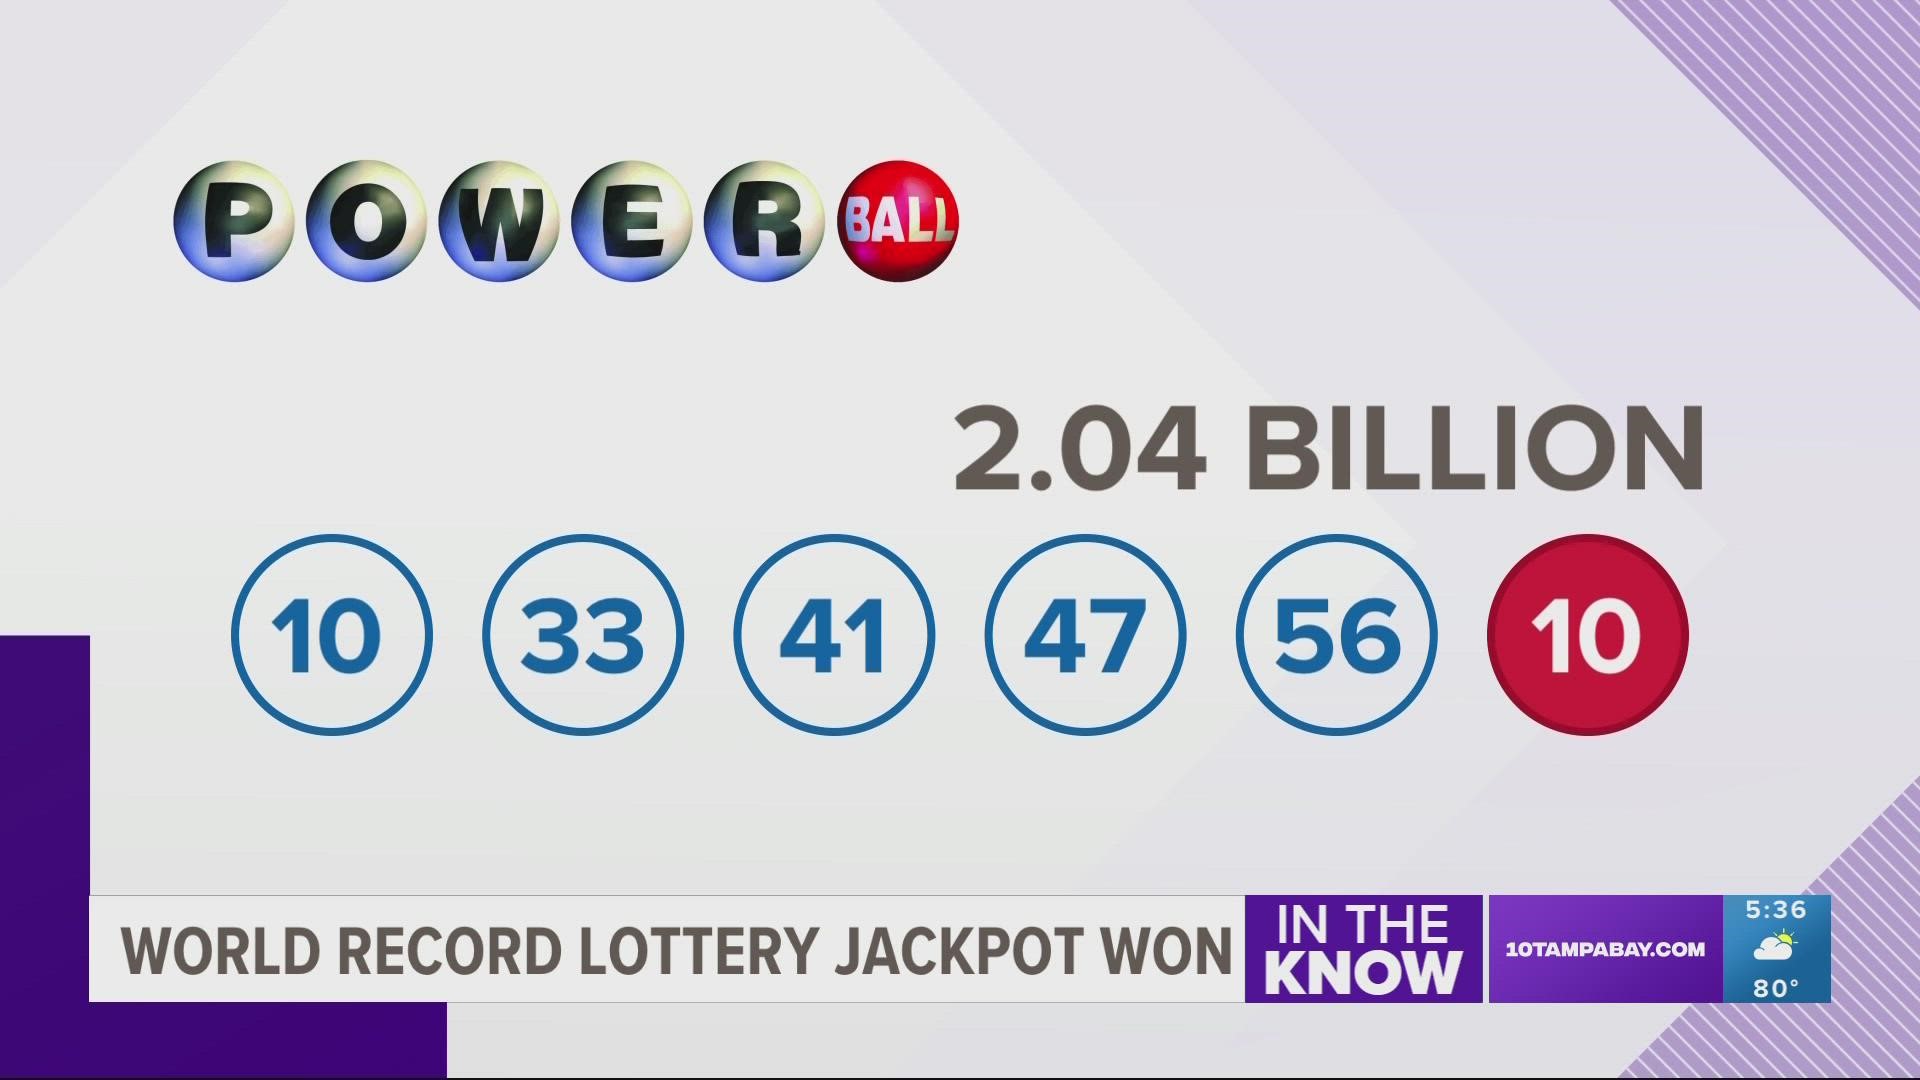 It's been a dramatic day for lottery players.